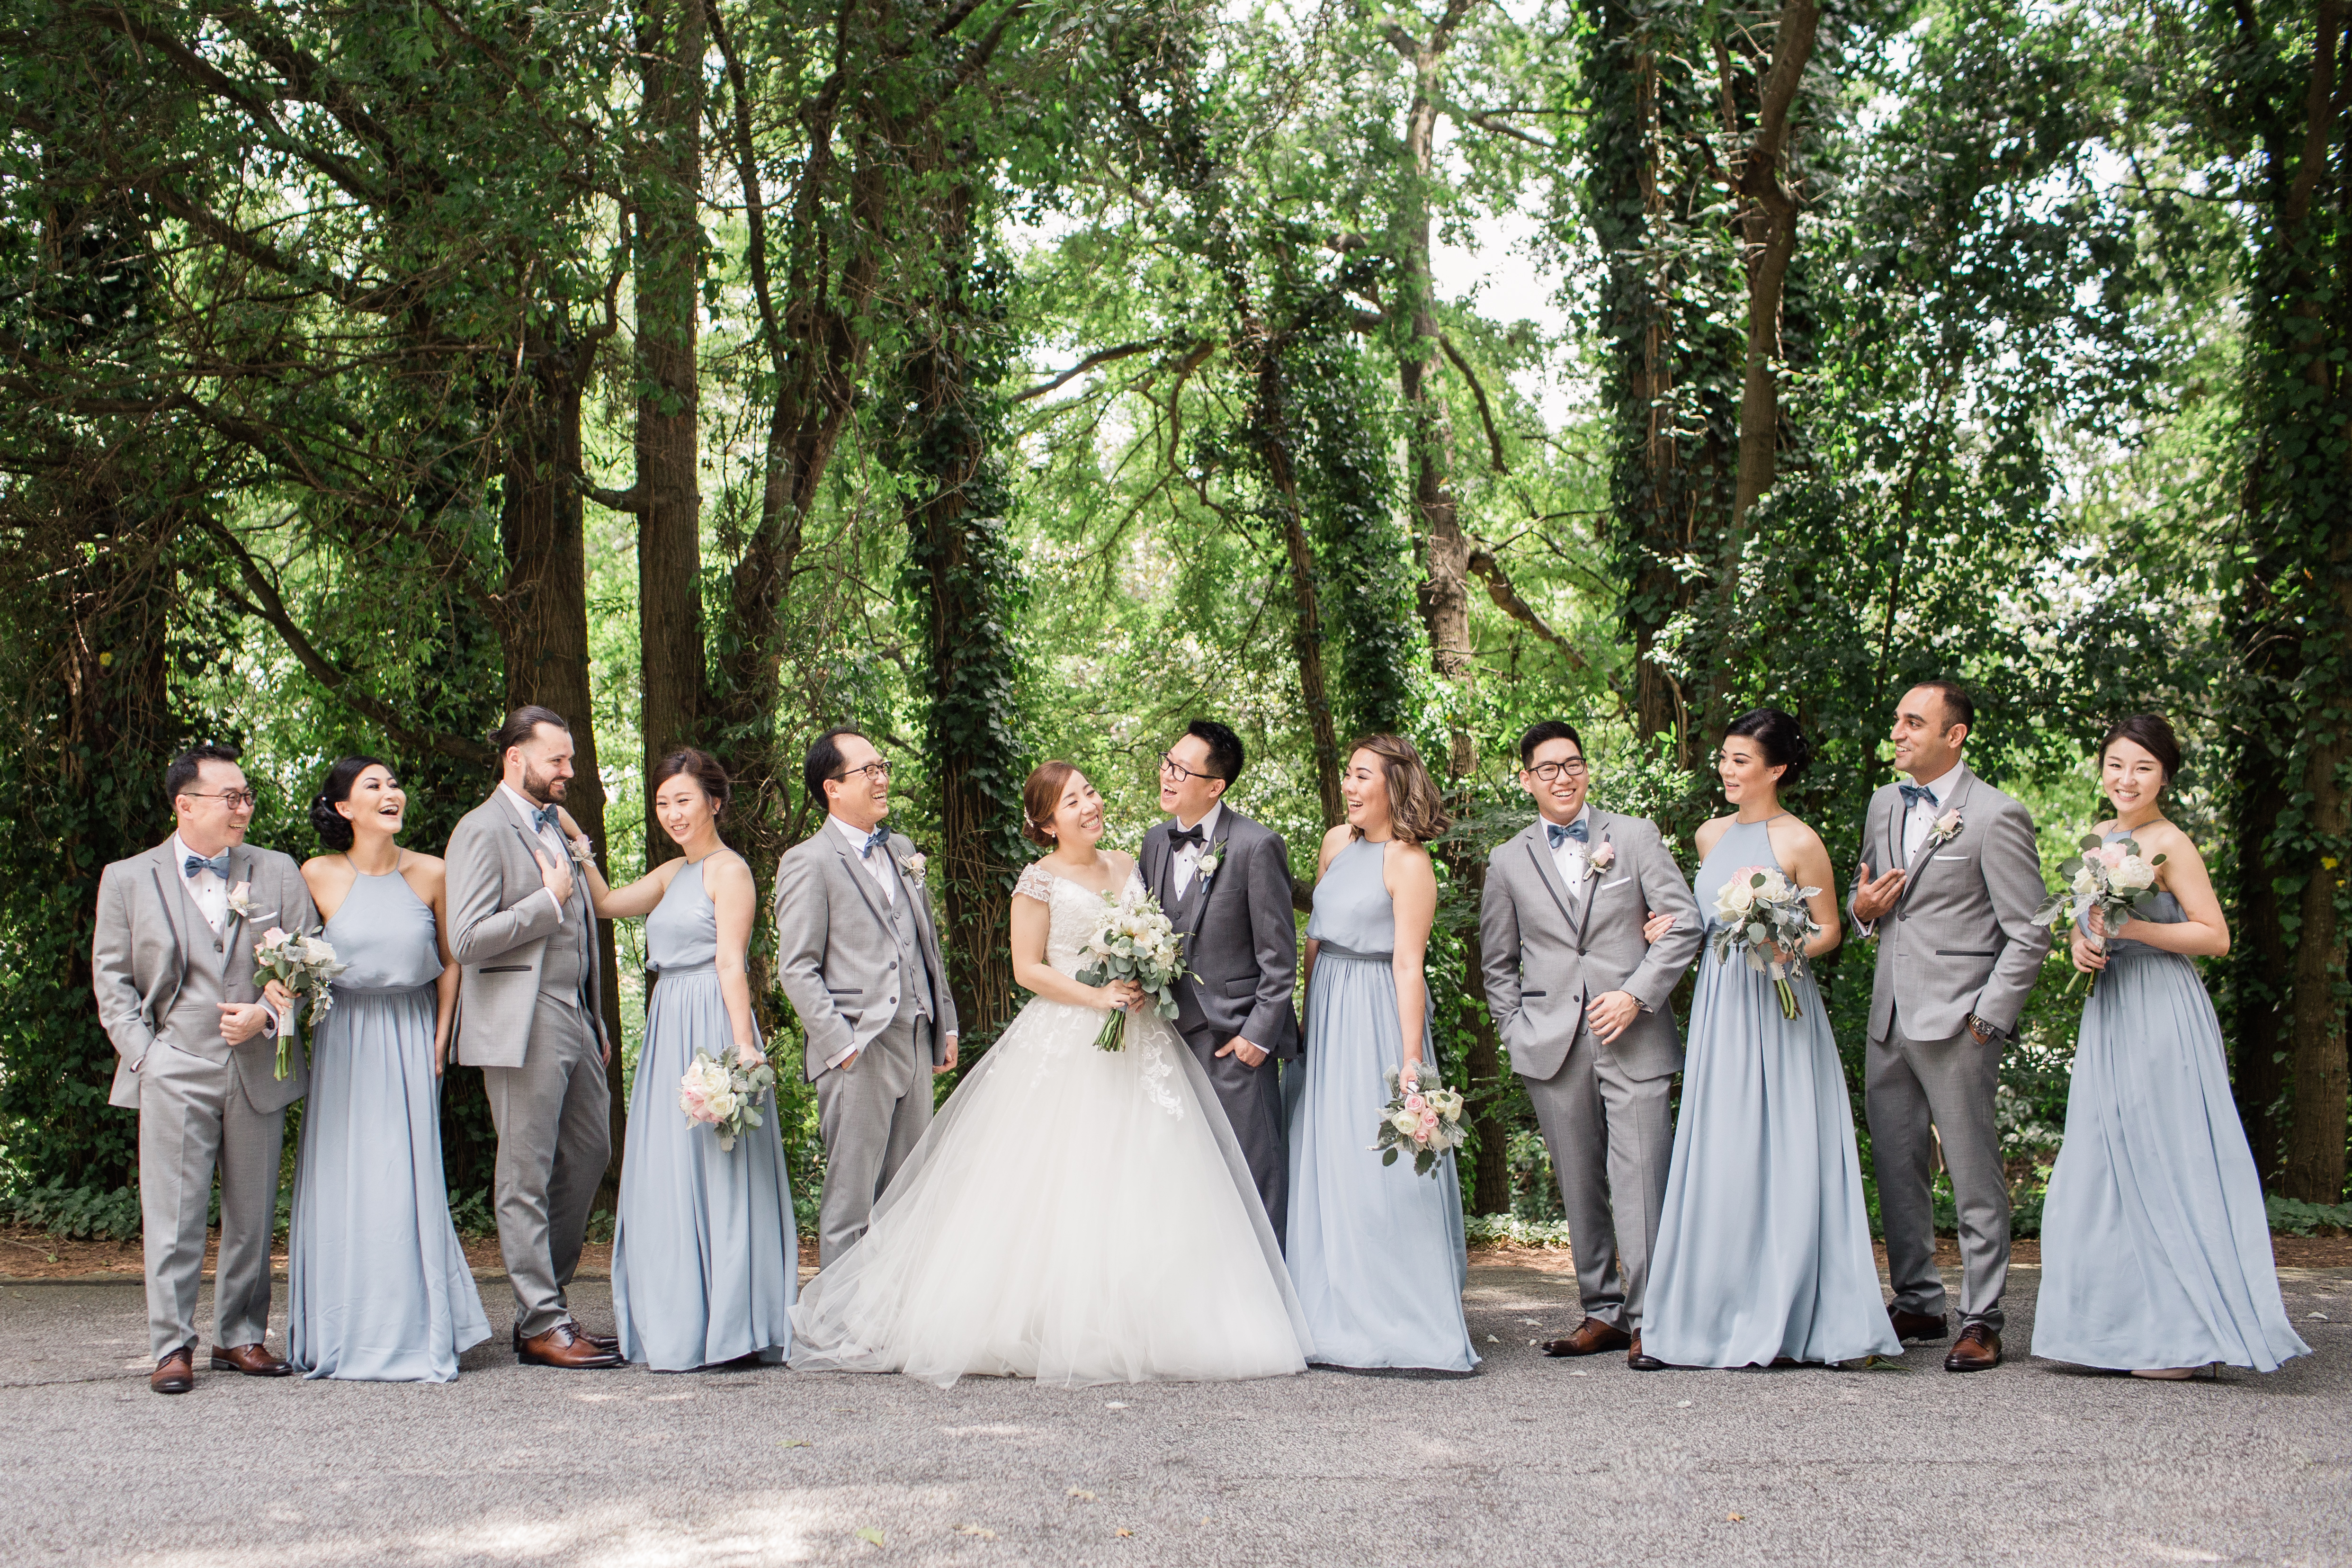 Fun and relaxed bridal party wedding photos add such a great element to your gallery!